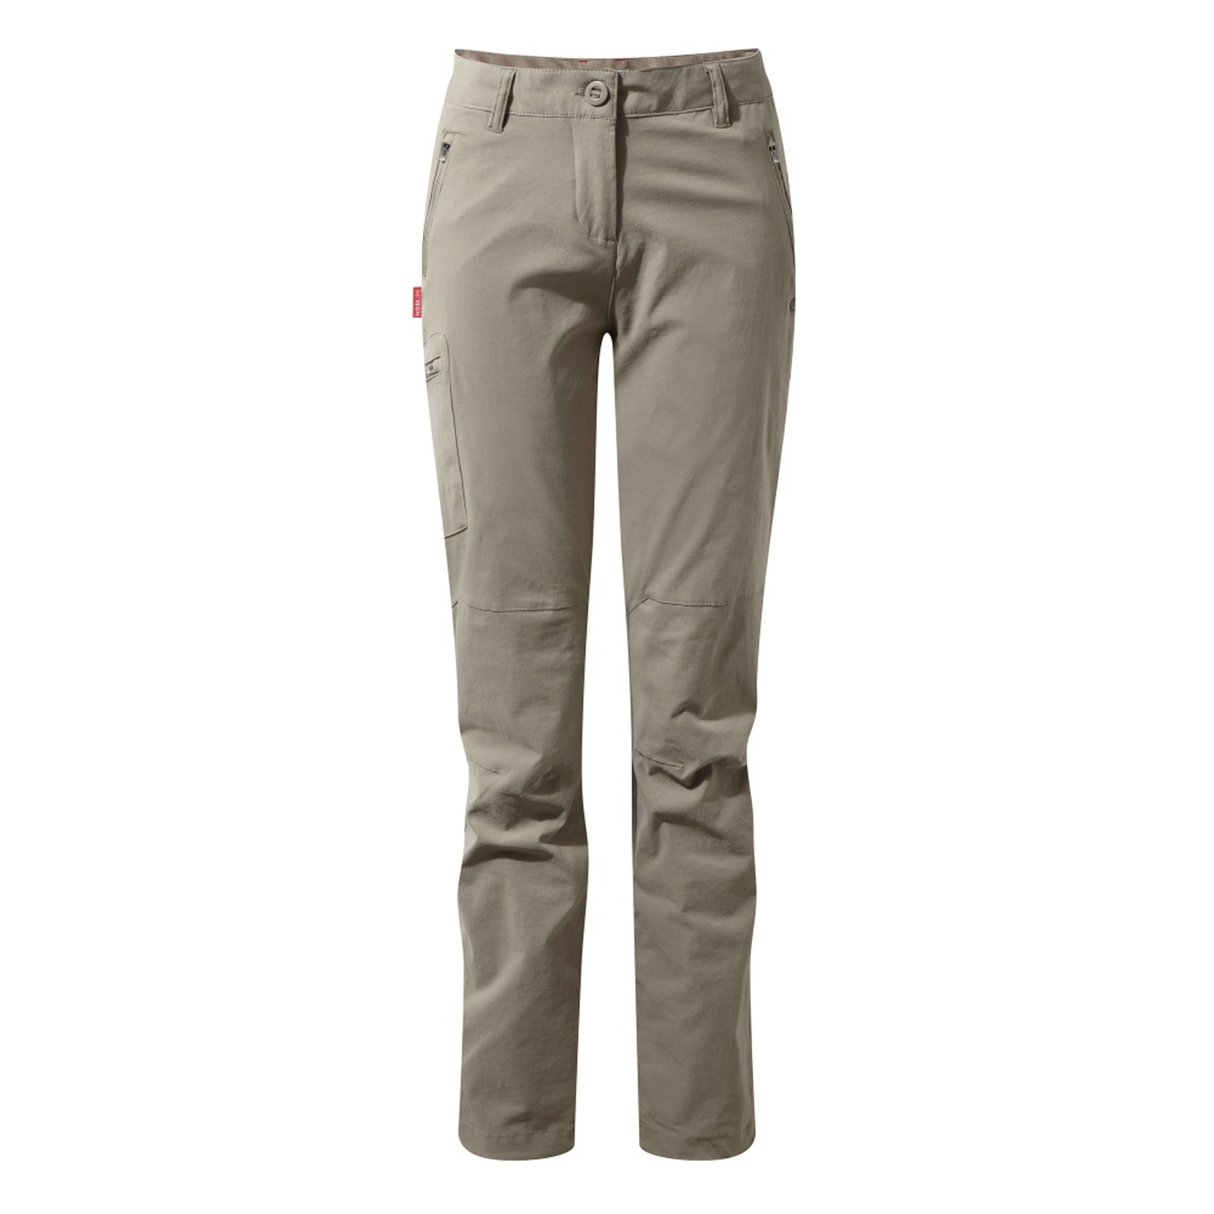 Craghoppers Womens Nlife NosiLife Stretch Walking Trousers